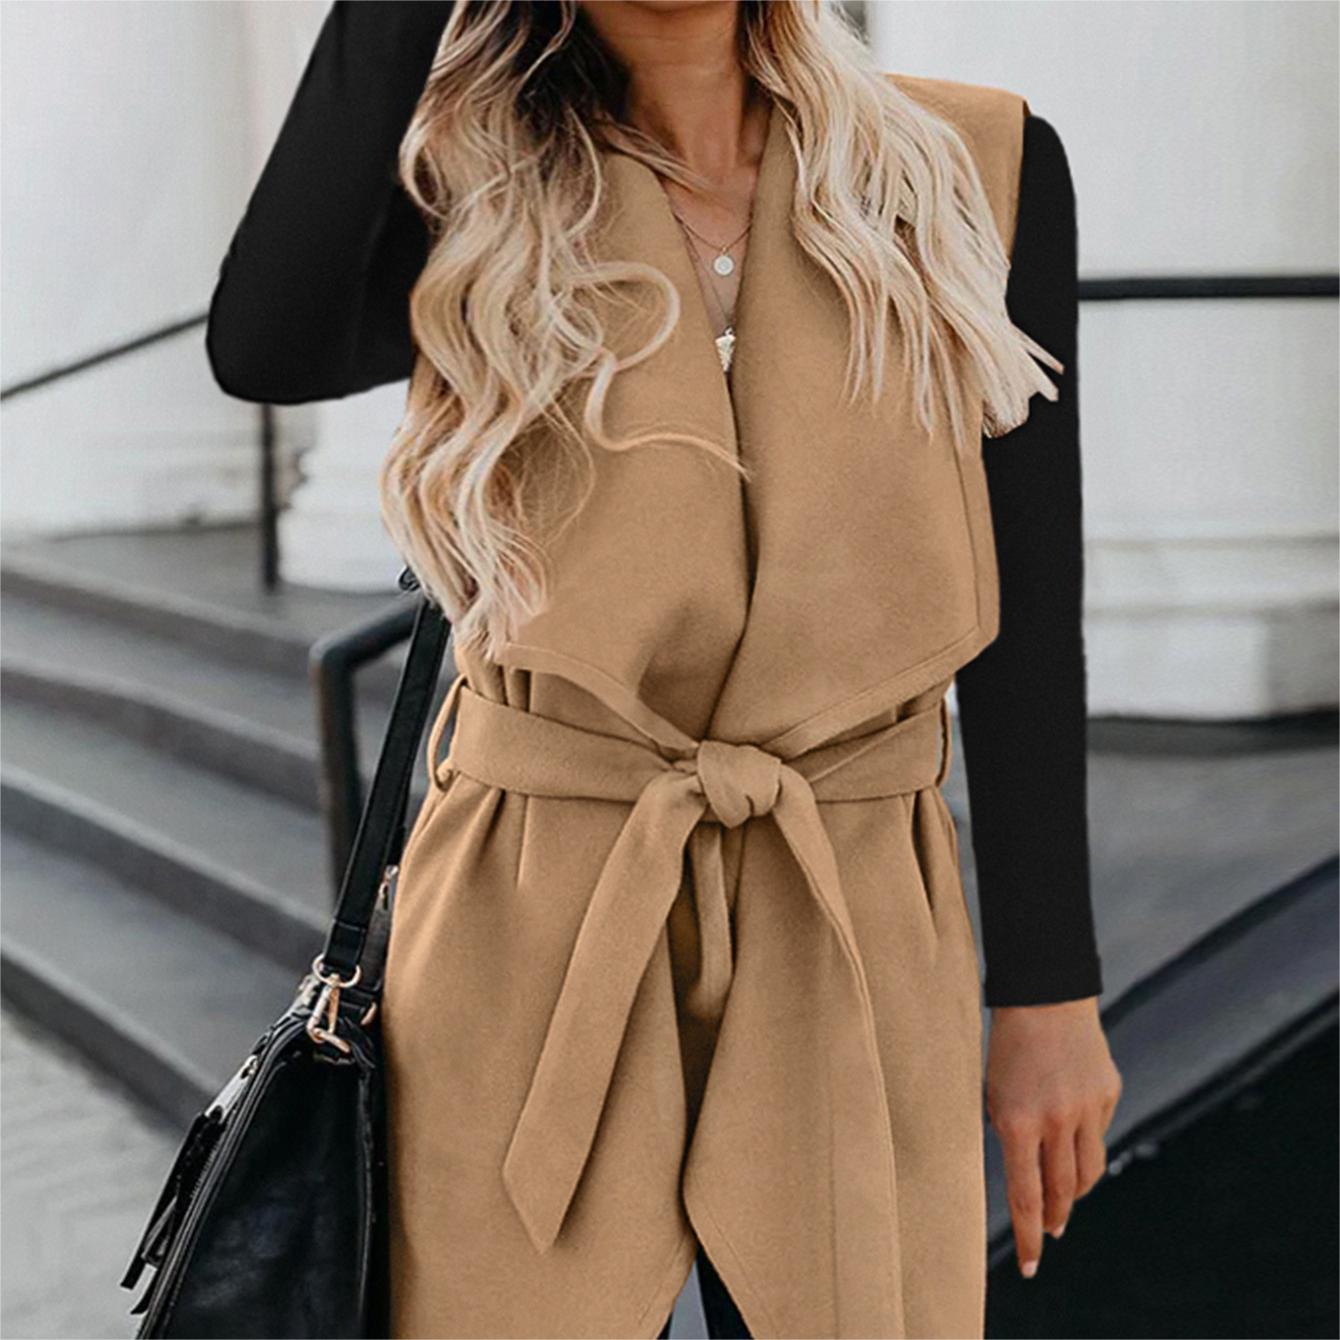 Sleeveless Wool Coat in a Solid Color for a Chic Look